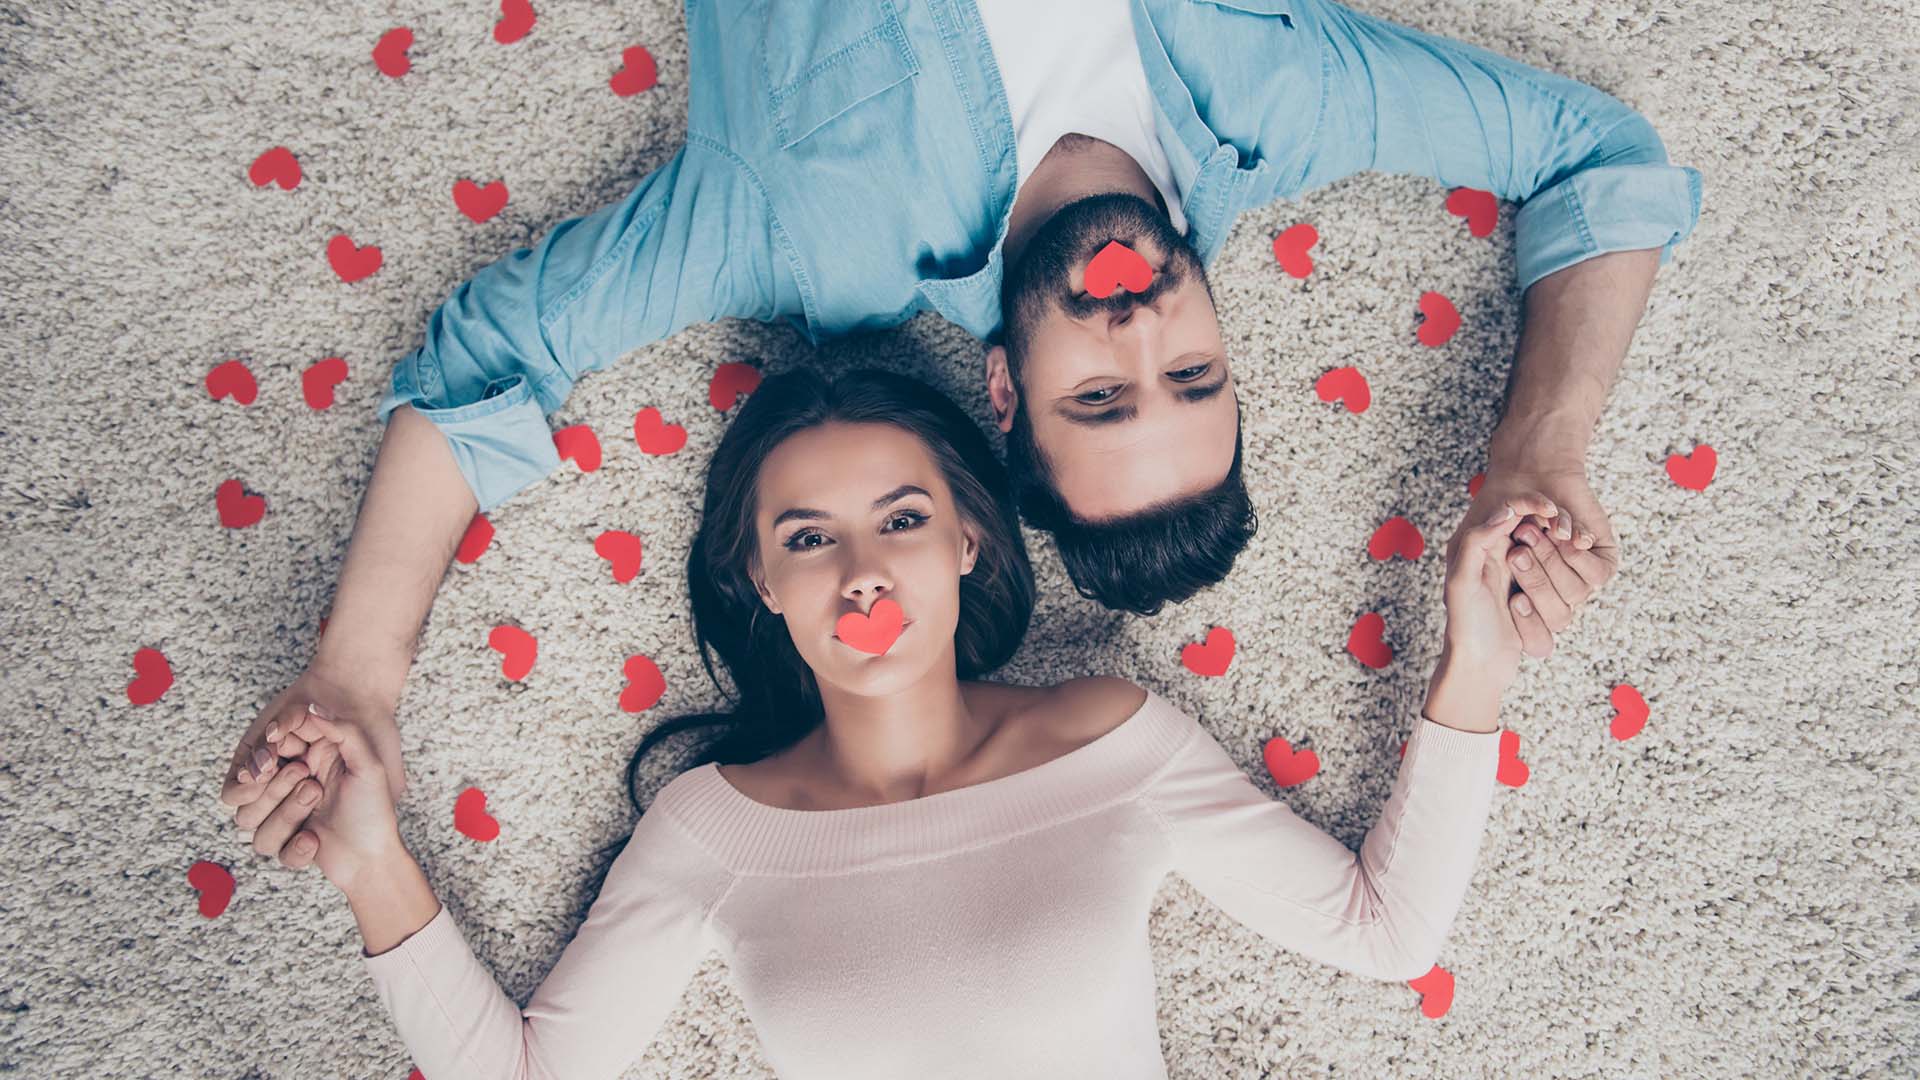 Brunette man in blue shirt and woman in white shirt lying on beige carpet with love hearts on their lips, holding hands.